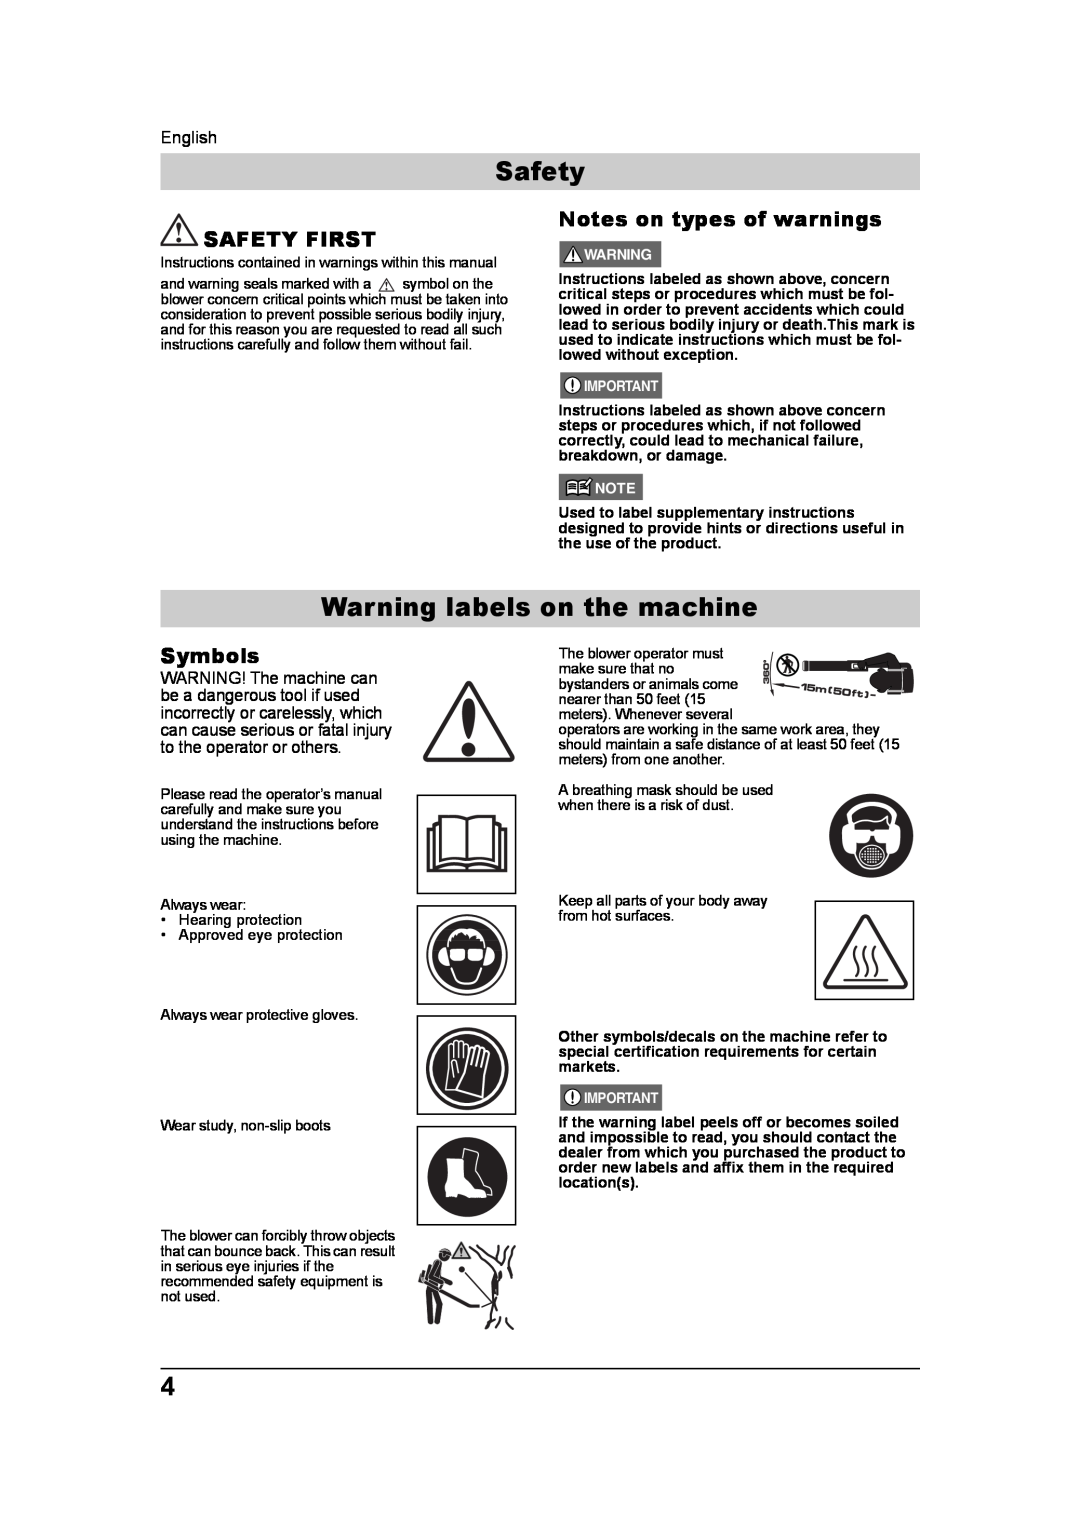 Husqvarna 965877502, 350BT/BF manual Warning labels on the machine, Safety First, Notes on types of warnings, Symbols 